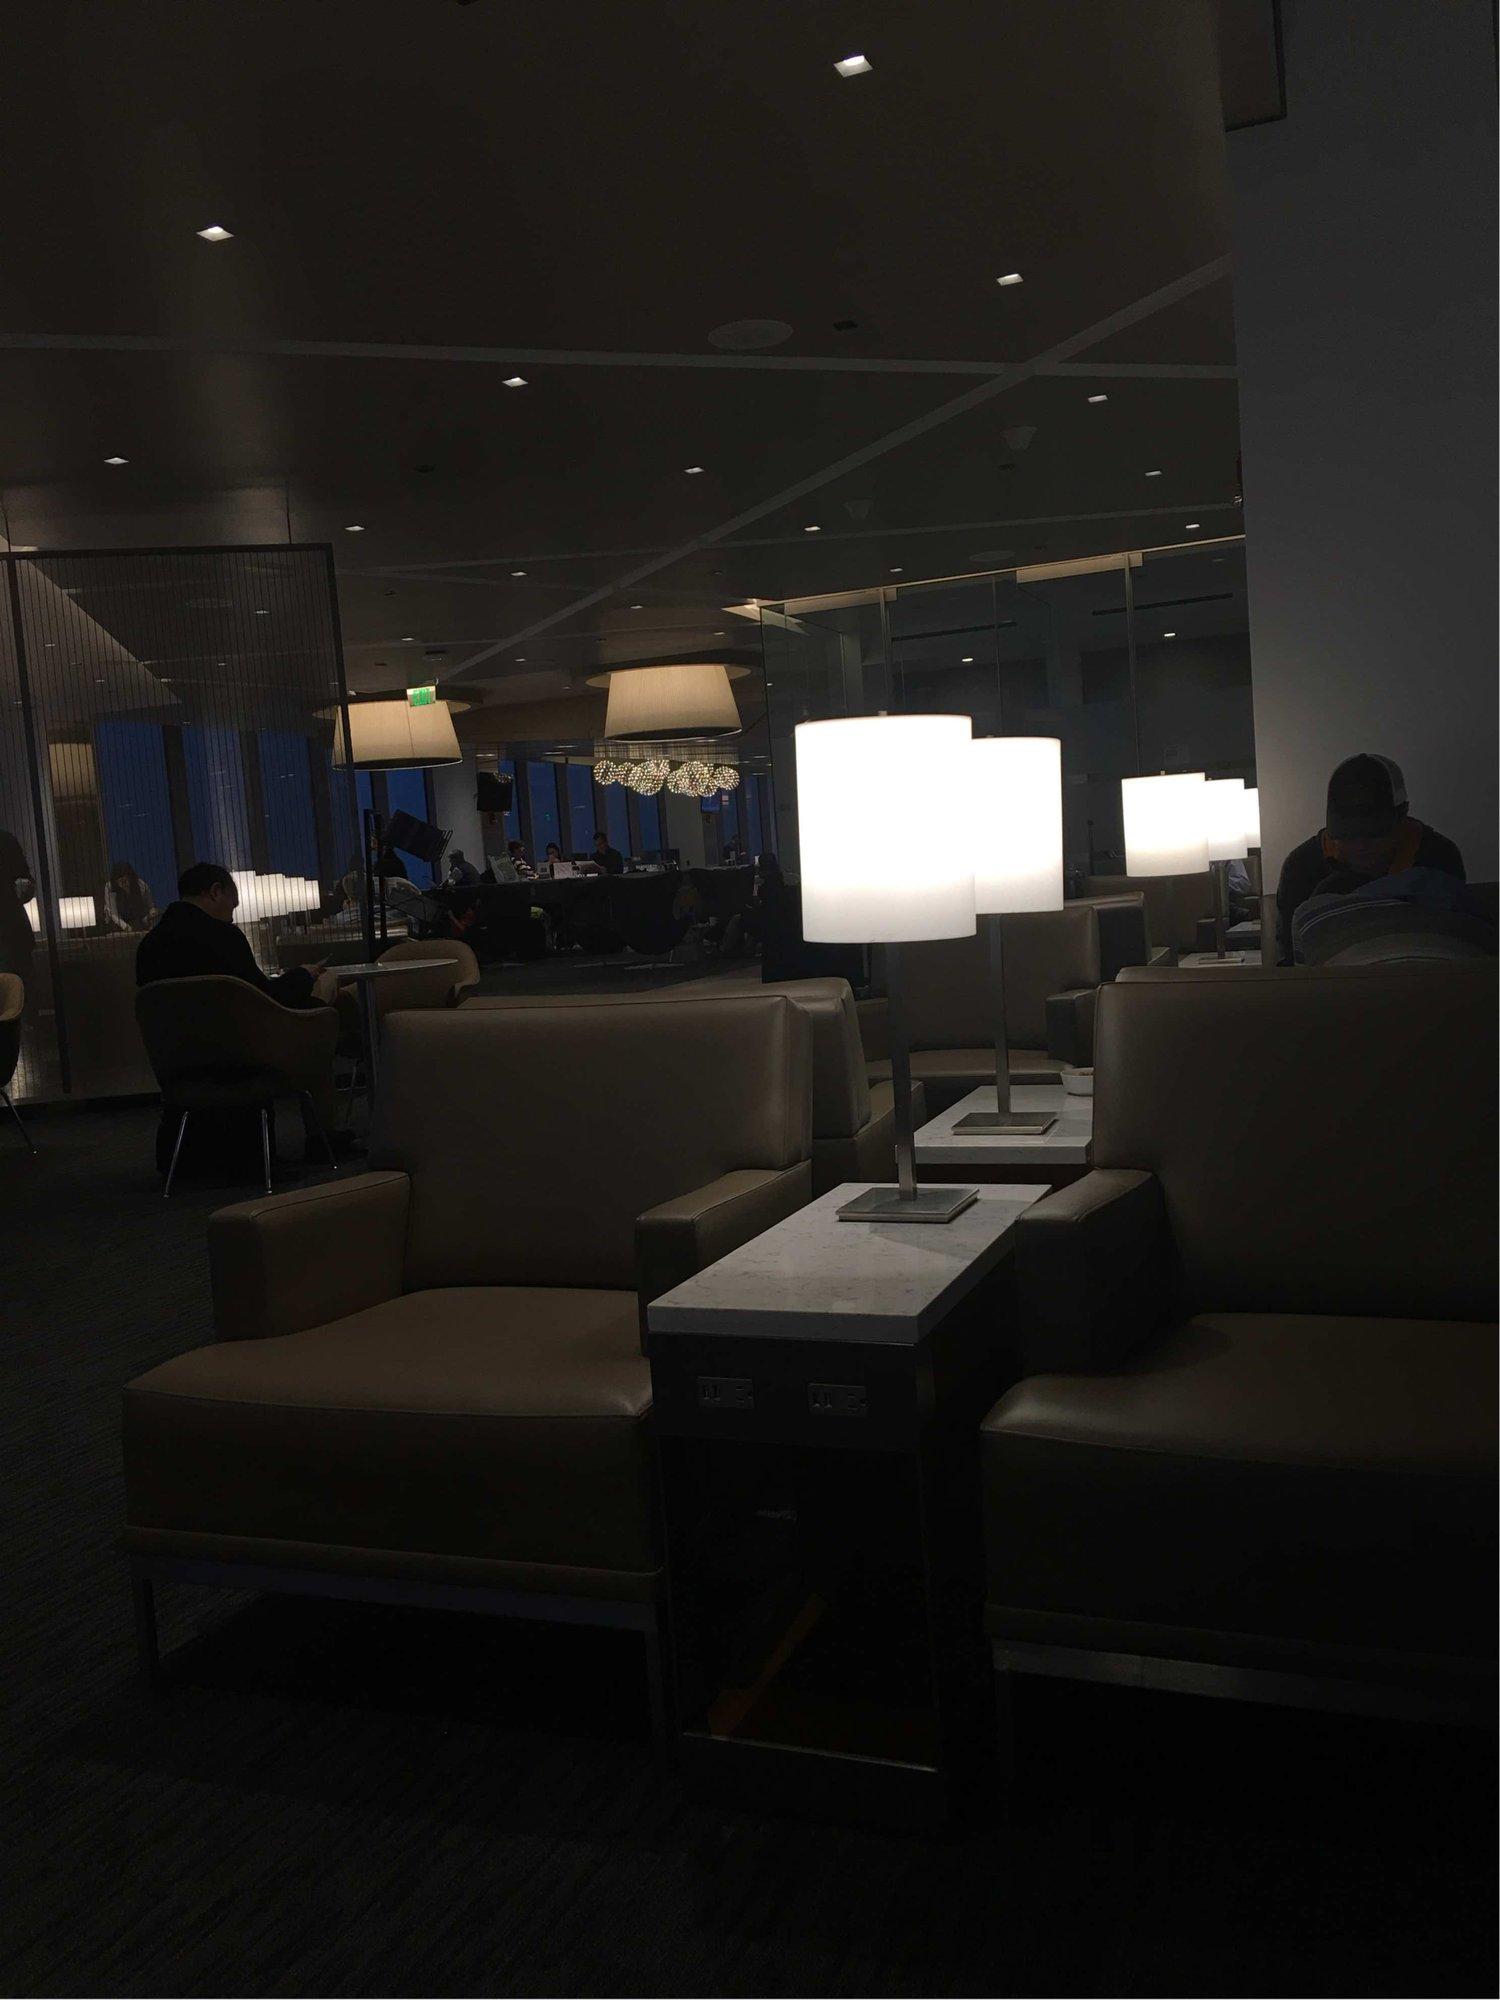 United Airlines United Club image 28 of 28